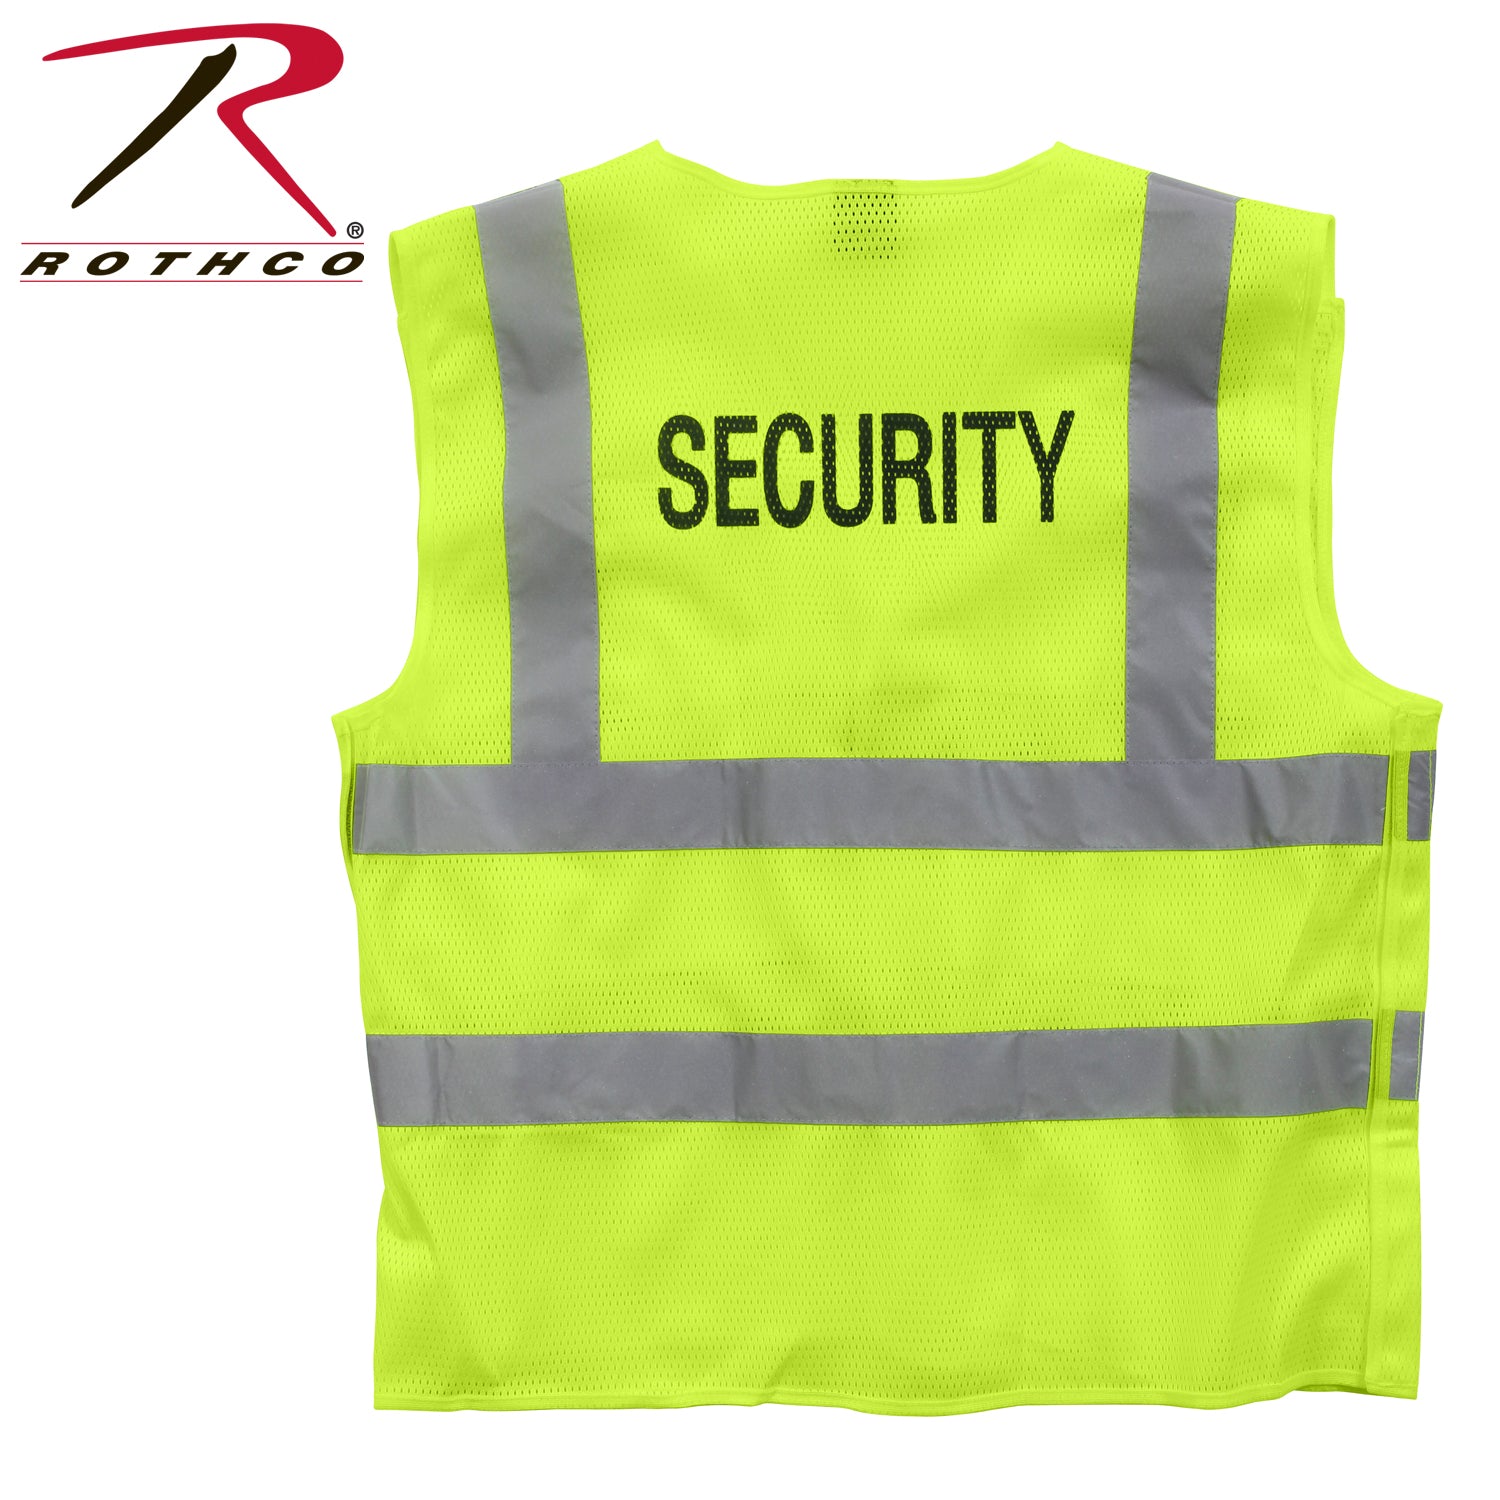 Rothco Security 5-Point Breakaway Safety Vest - Tactical Choice Plus